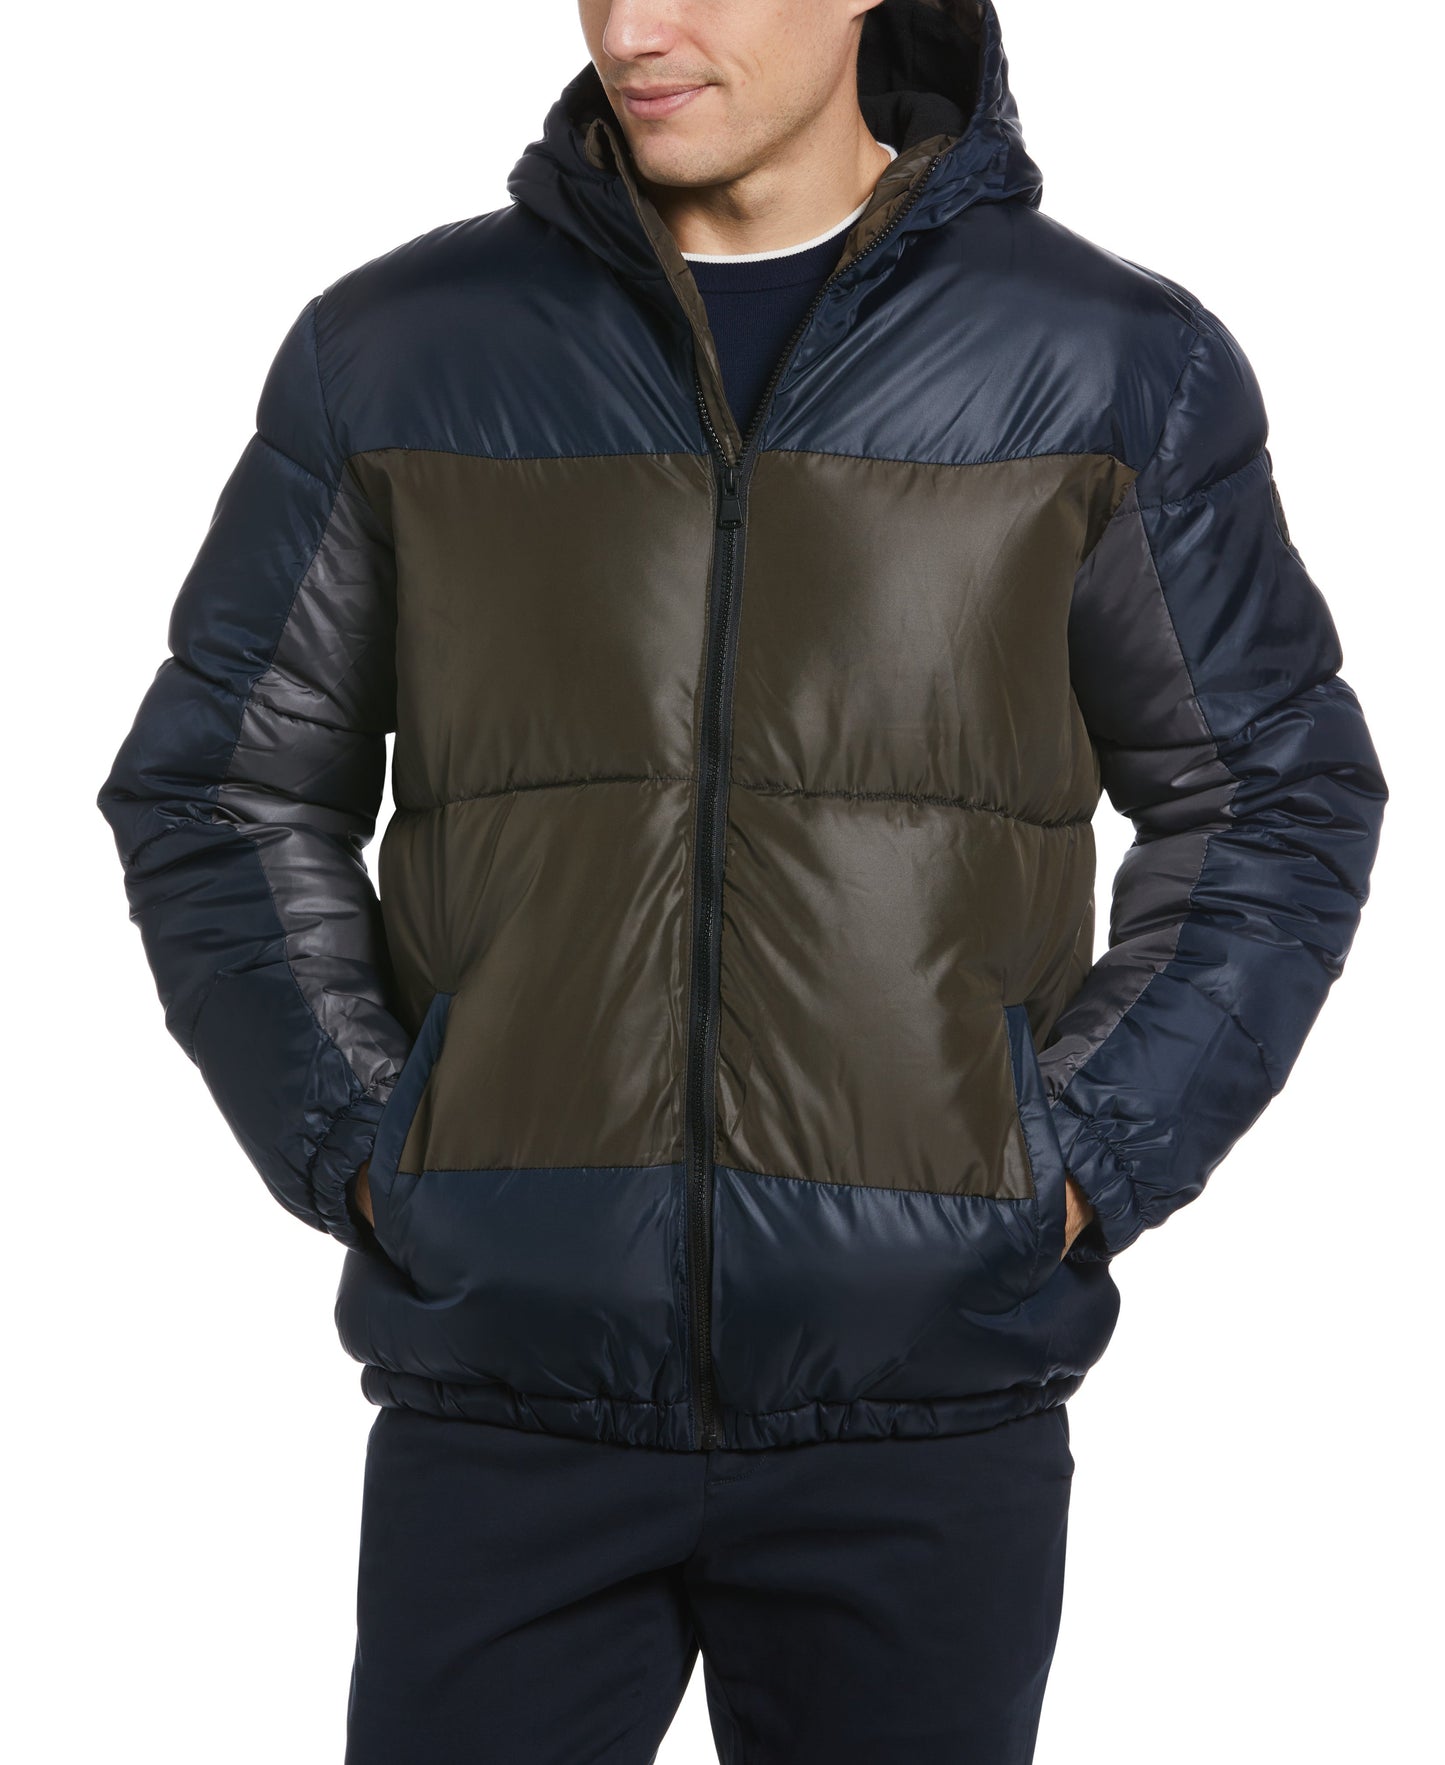 Colorblock Hooded Puffer Jacket